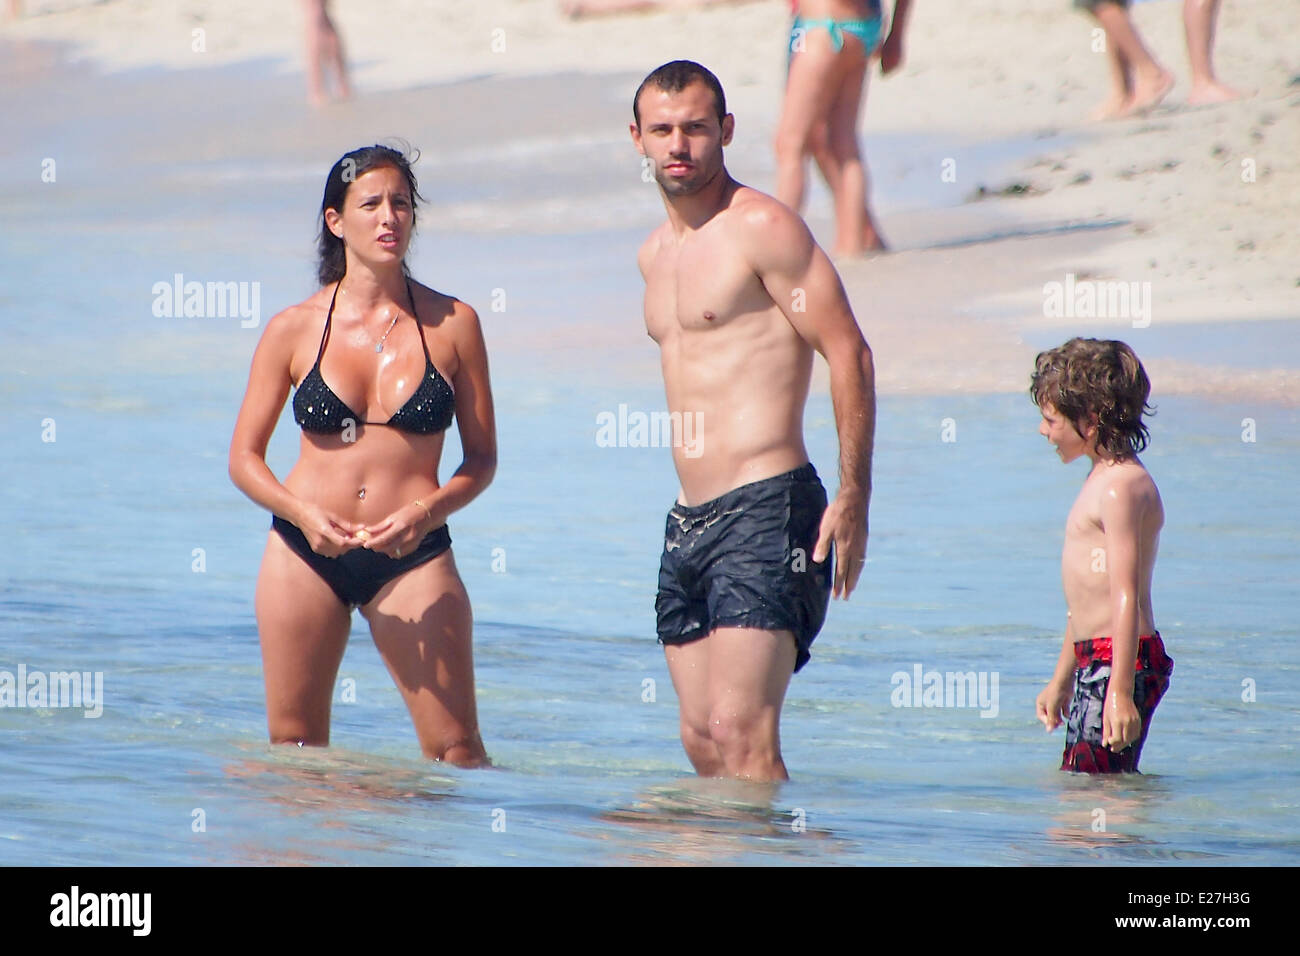 FC Barcelona midfielder Javier Mascherano spends time at the beach with his  wife and children while on holiday in Formentera Featuring: Javier  Mascherano,Fernanda Mascherano Where: Formentera, Balearic Islands, Spain  When: 22 Jun